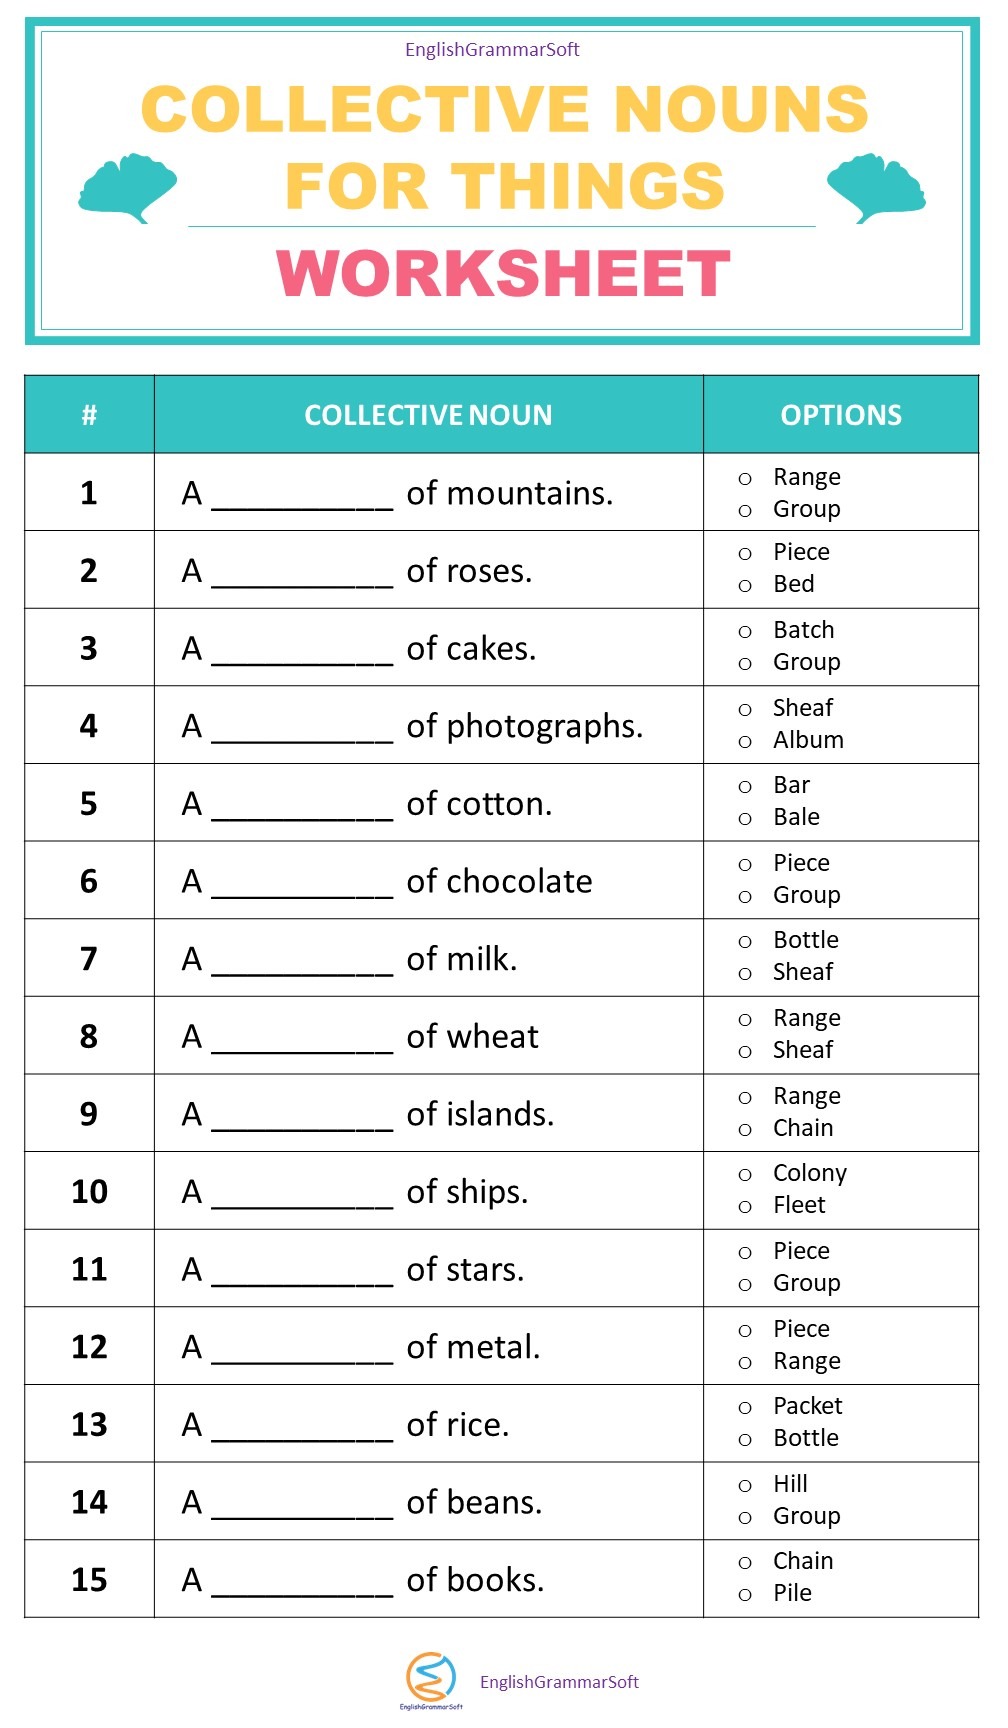 Collective Nouns for Things Worksheet